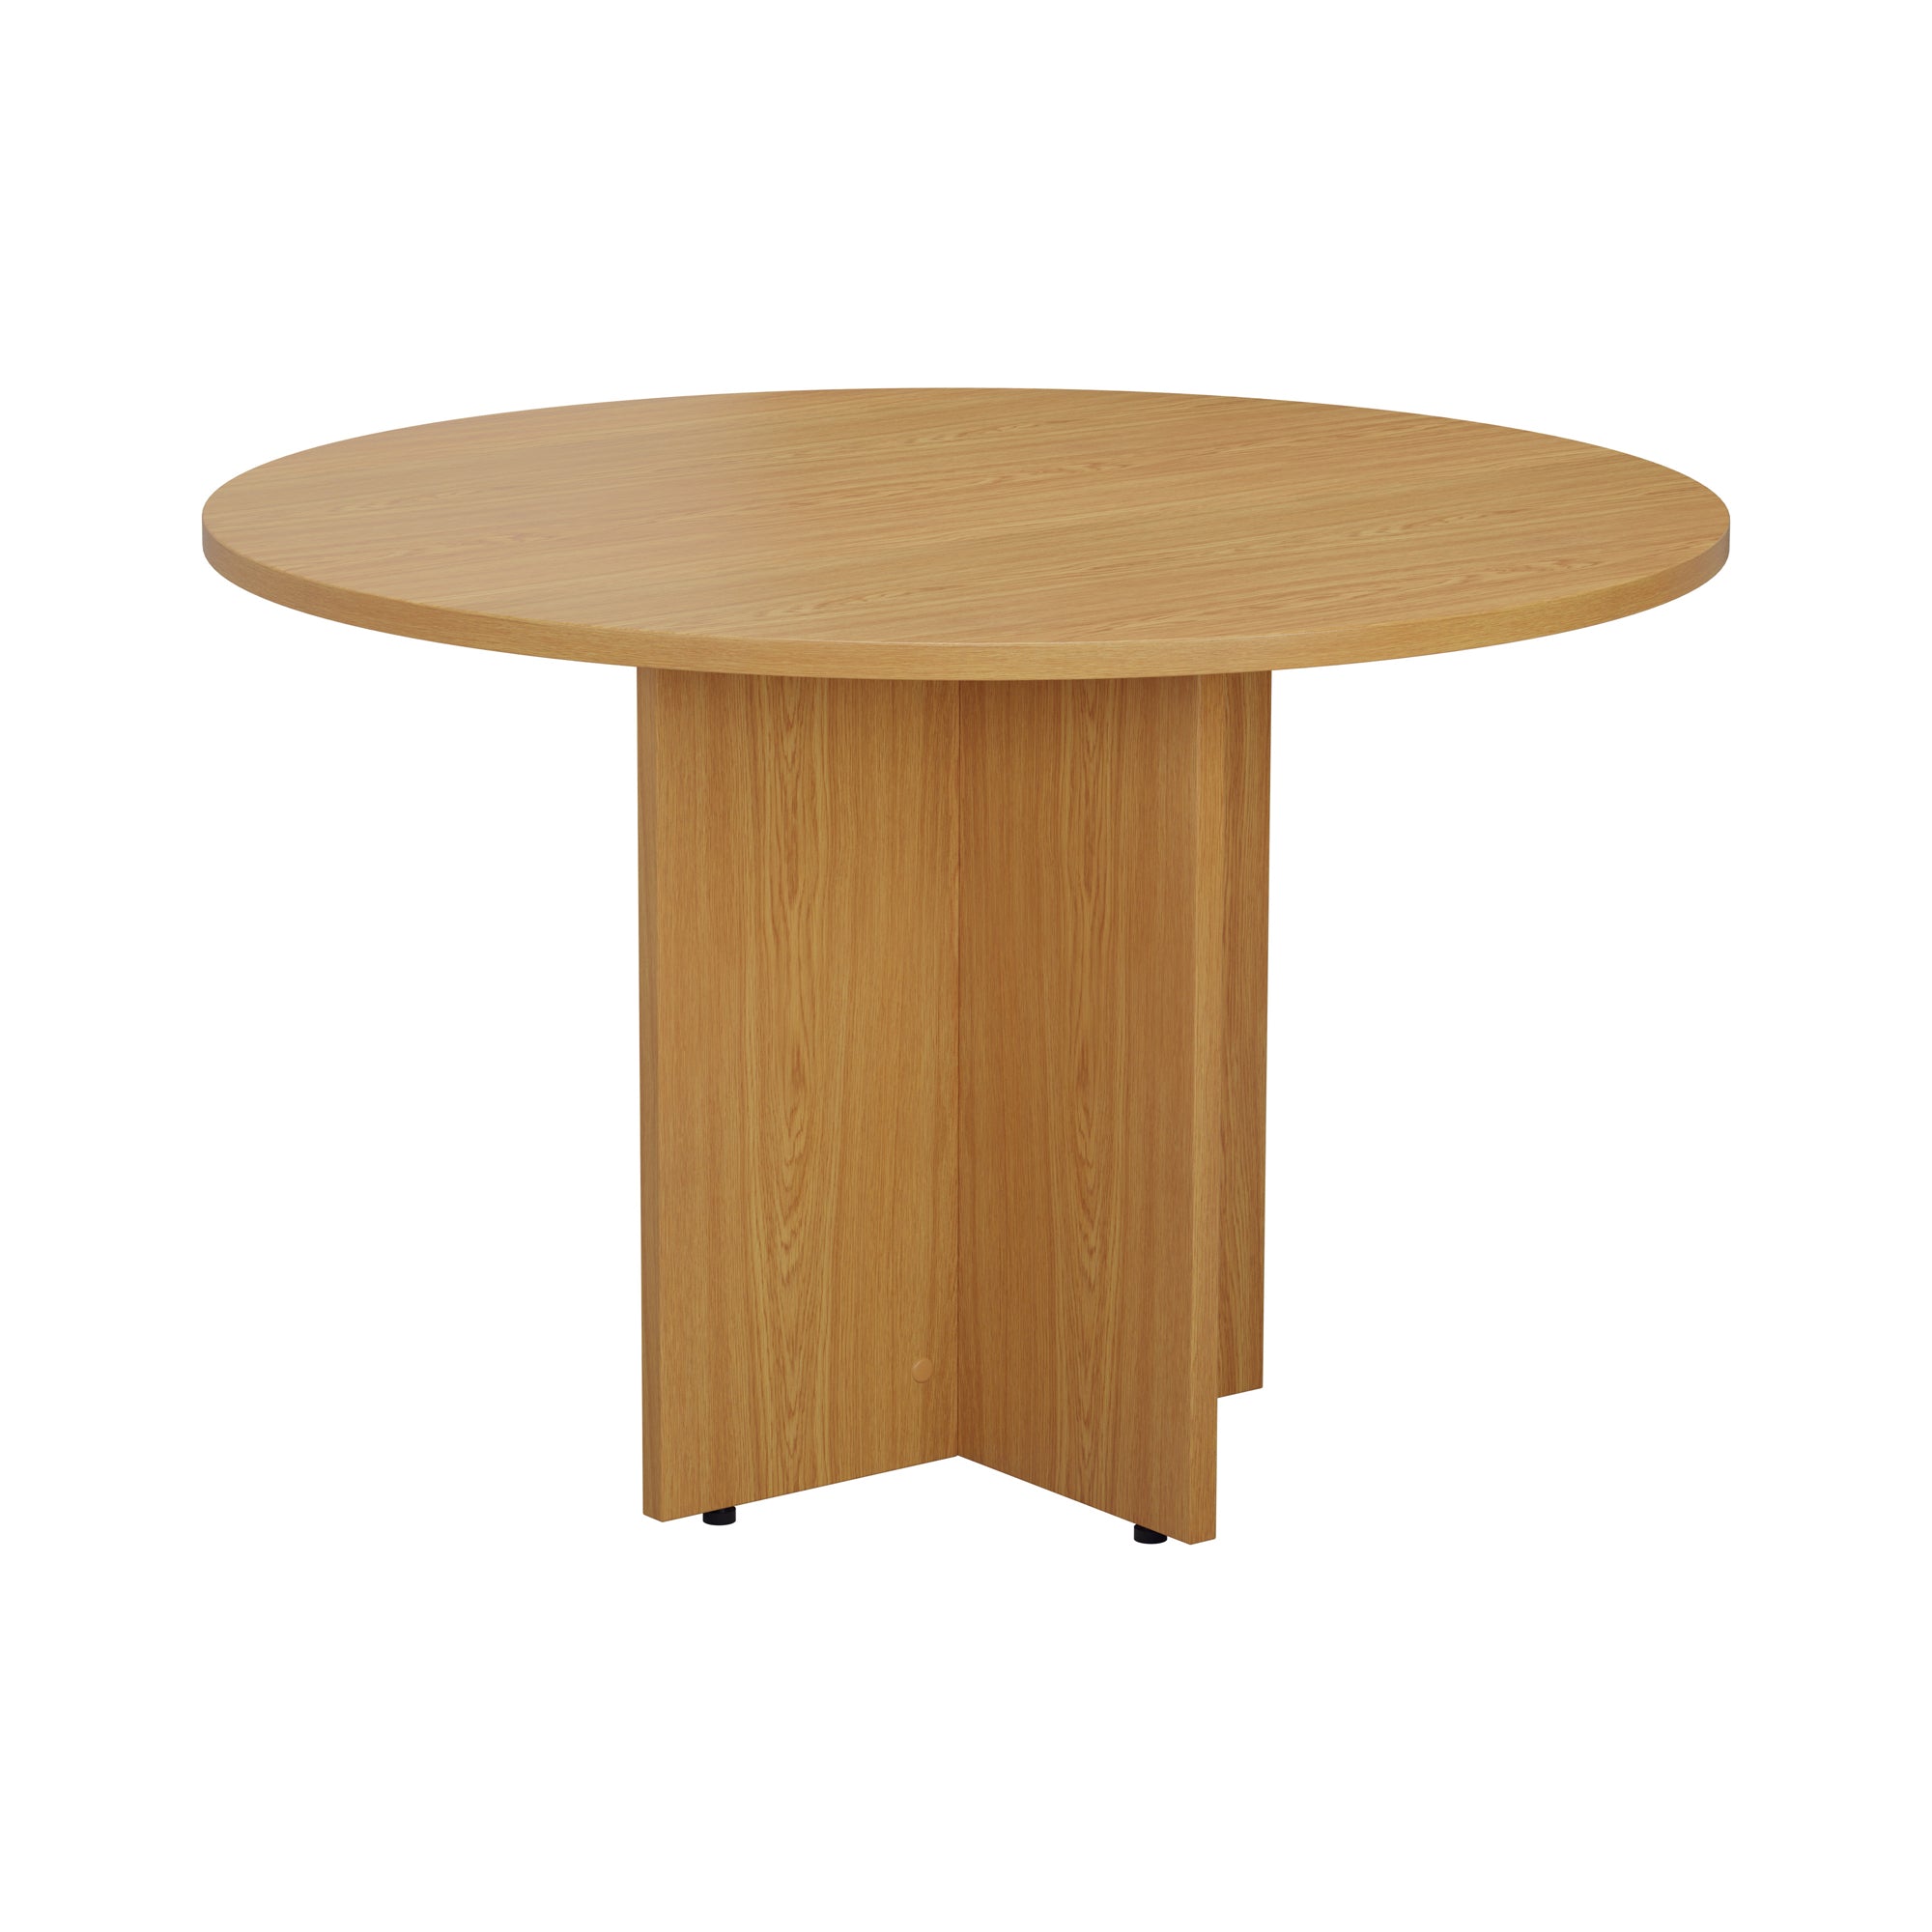 TC 1100mm Round Meeting Table